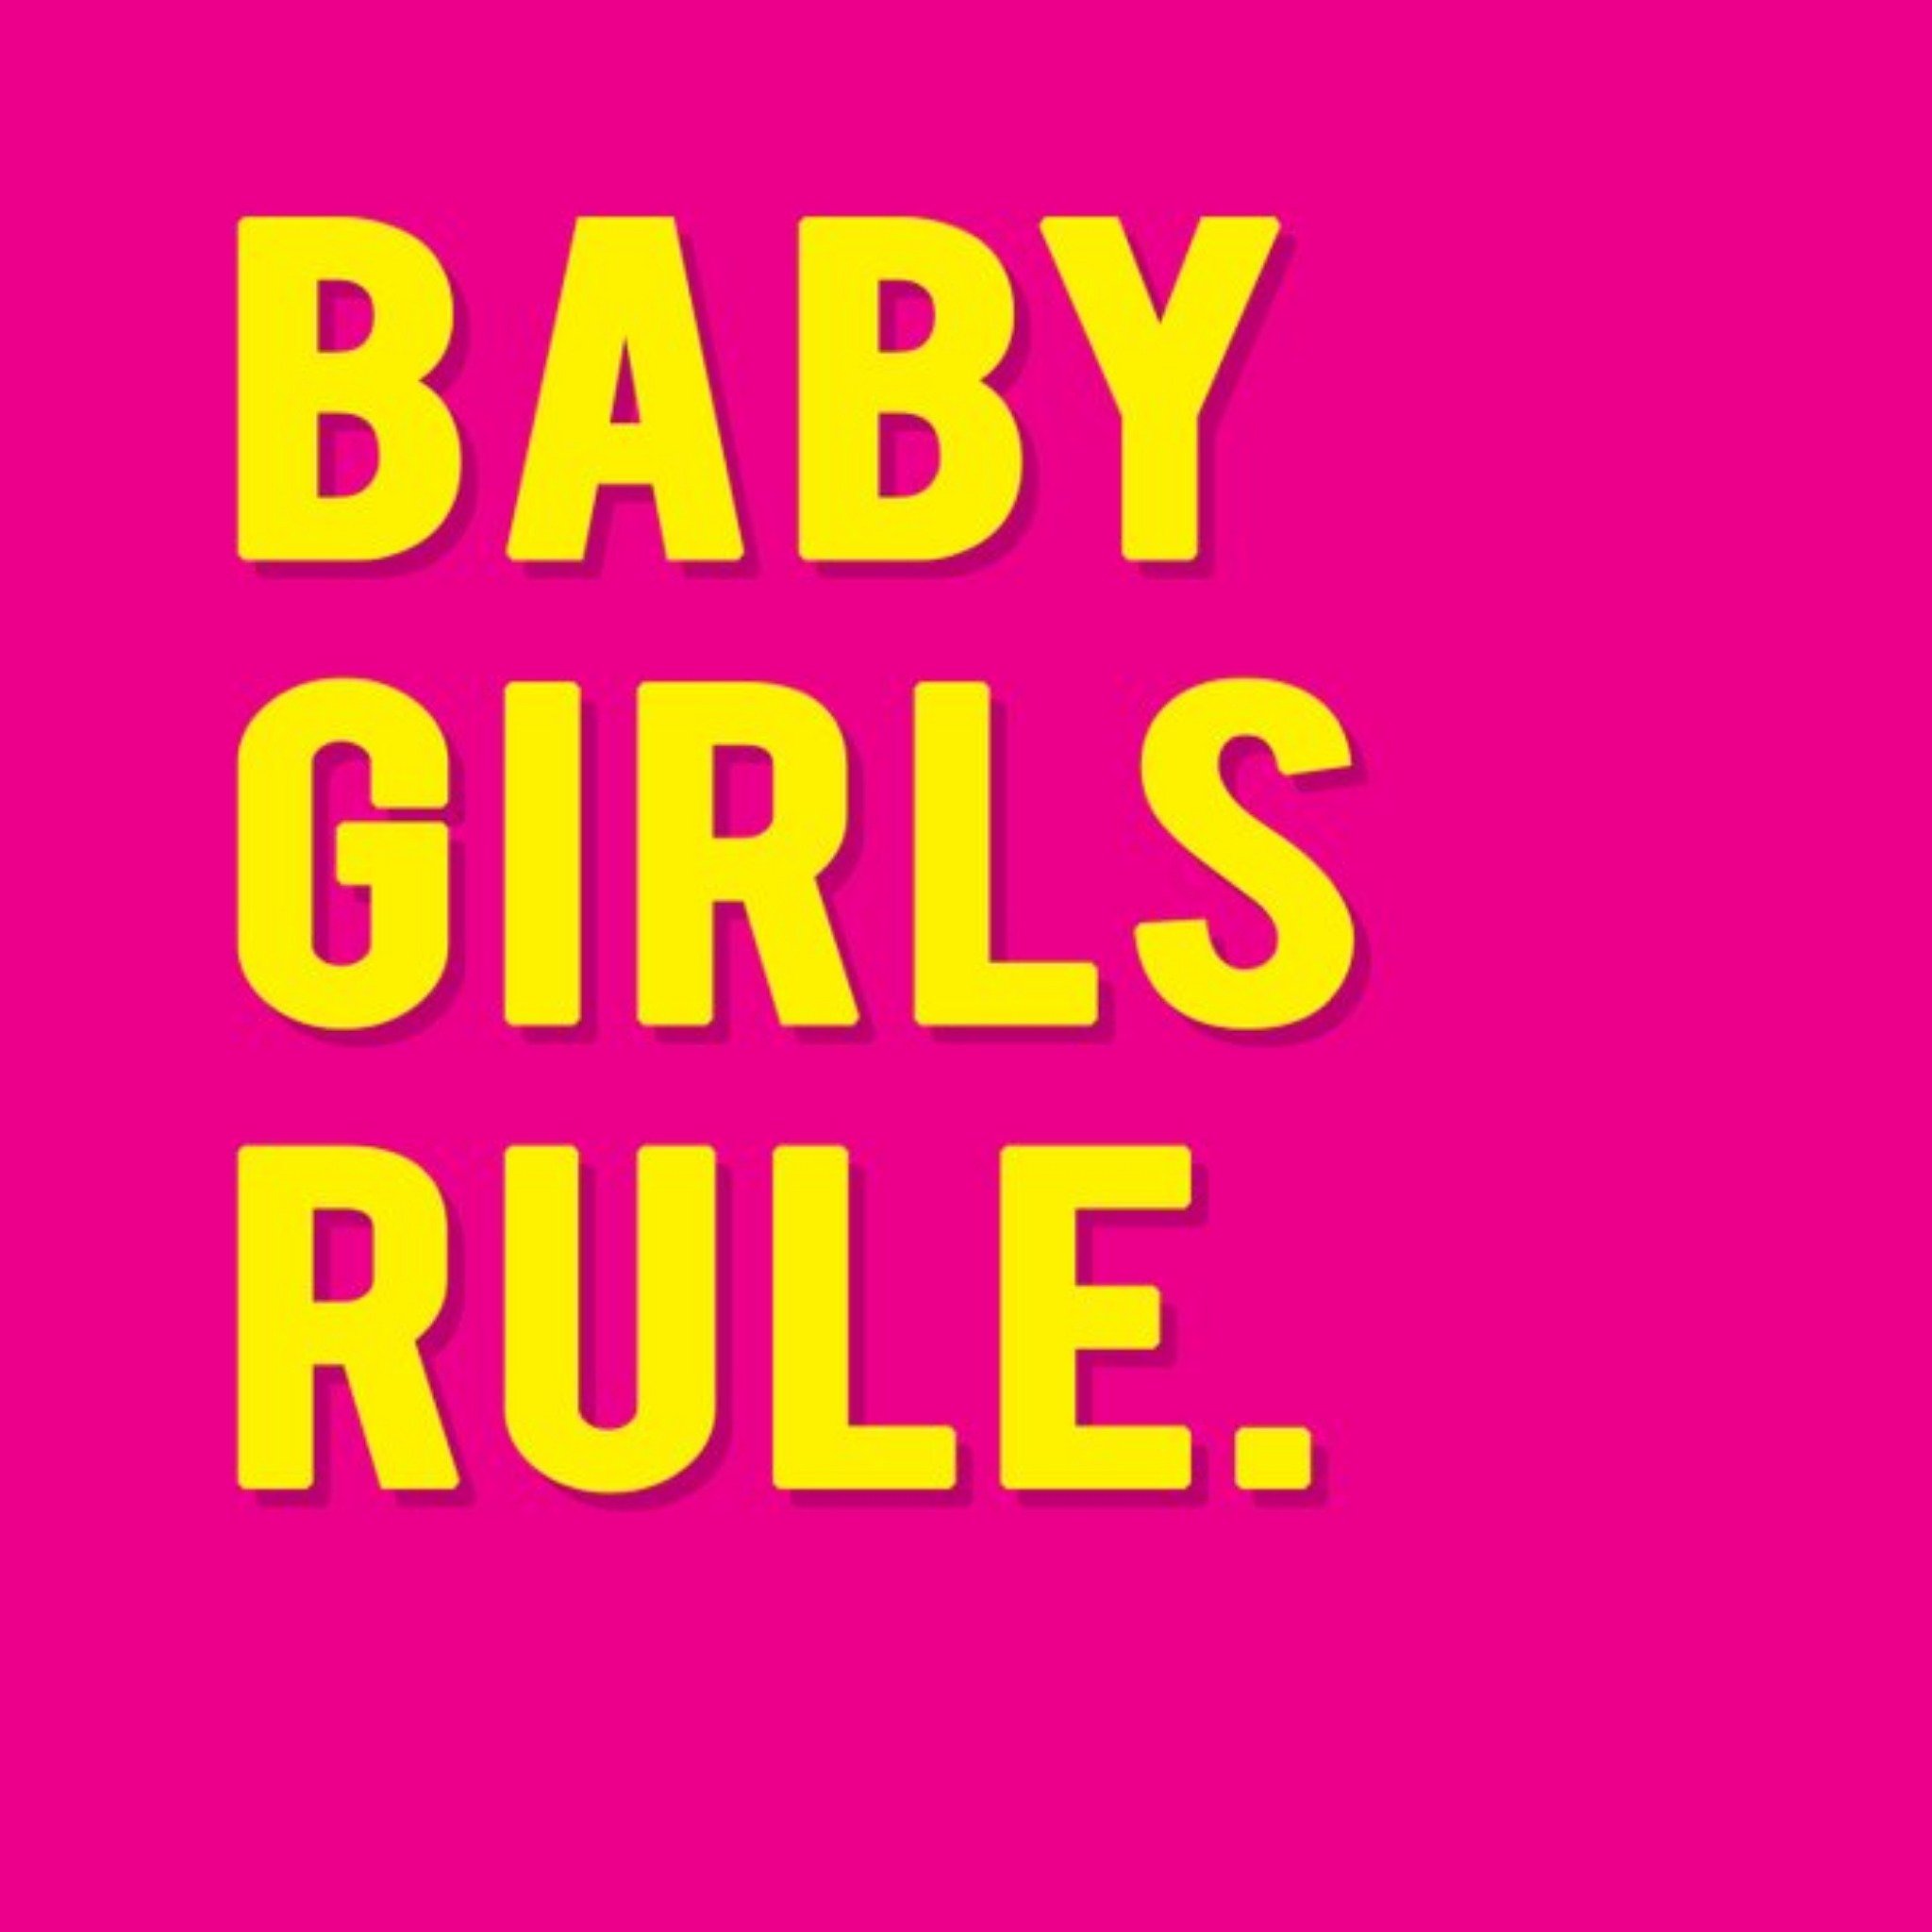 Moonpig Modern Typographical Baby Girls Rule Card, Square